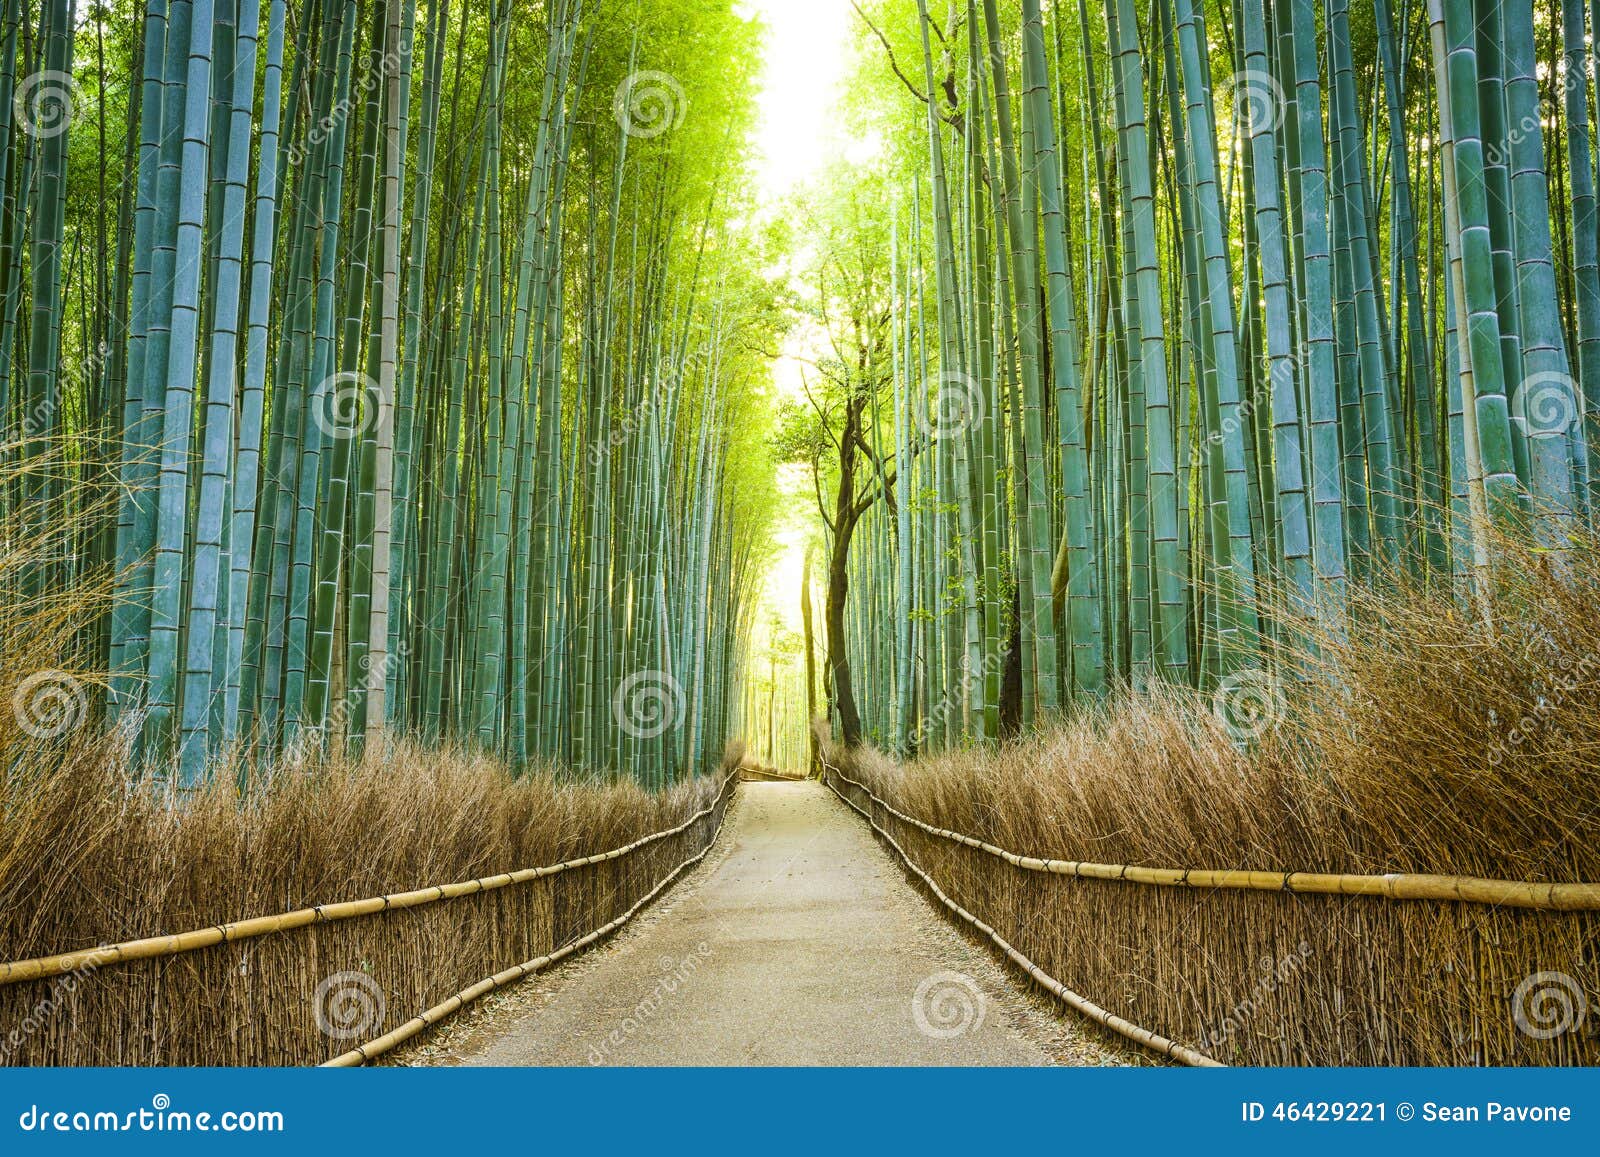 kyoto, japan bamboo forest